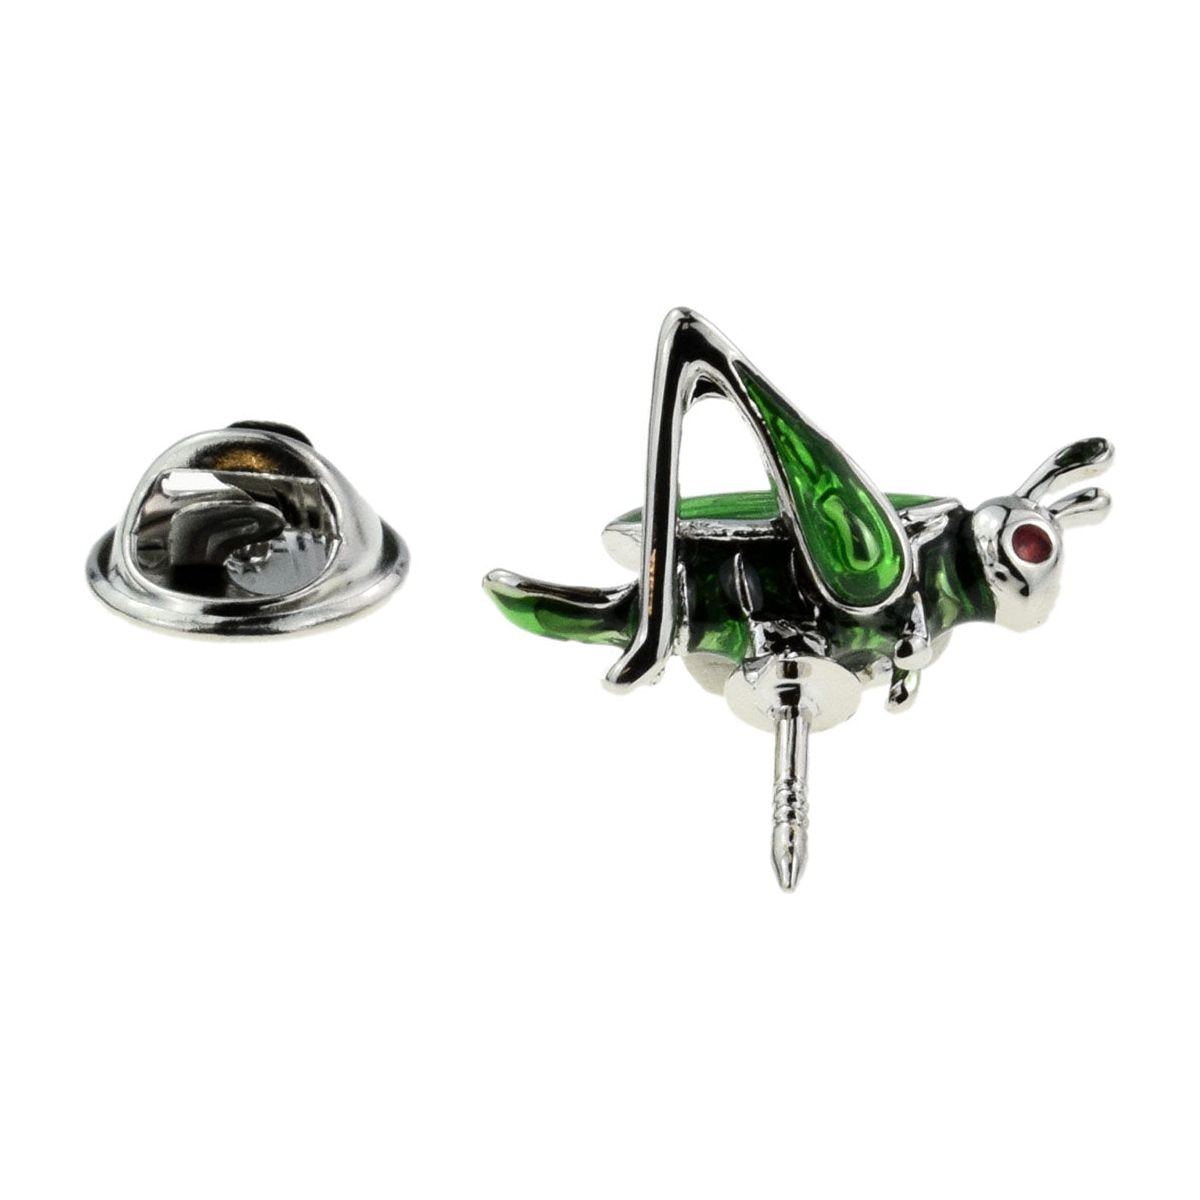 Green Cricket / Grasshopper Insect Lapel Pin Badge - Ashton and Finch